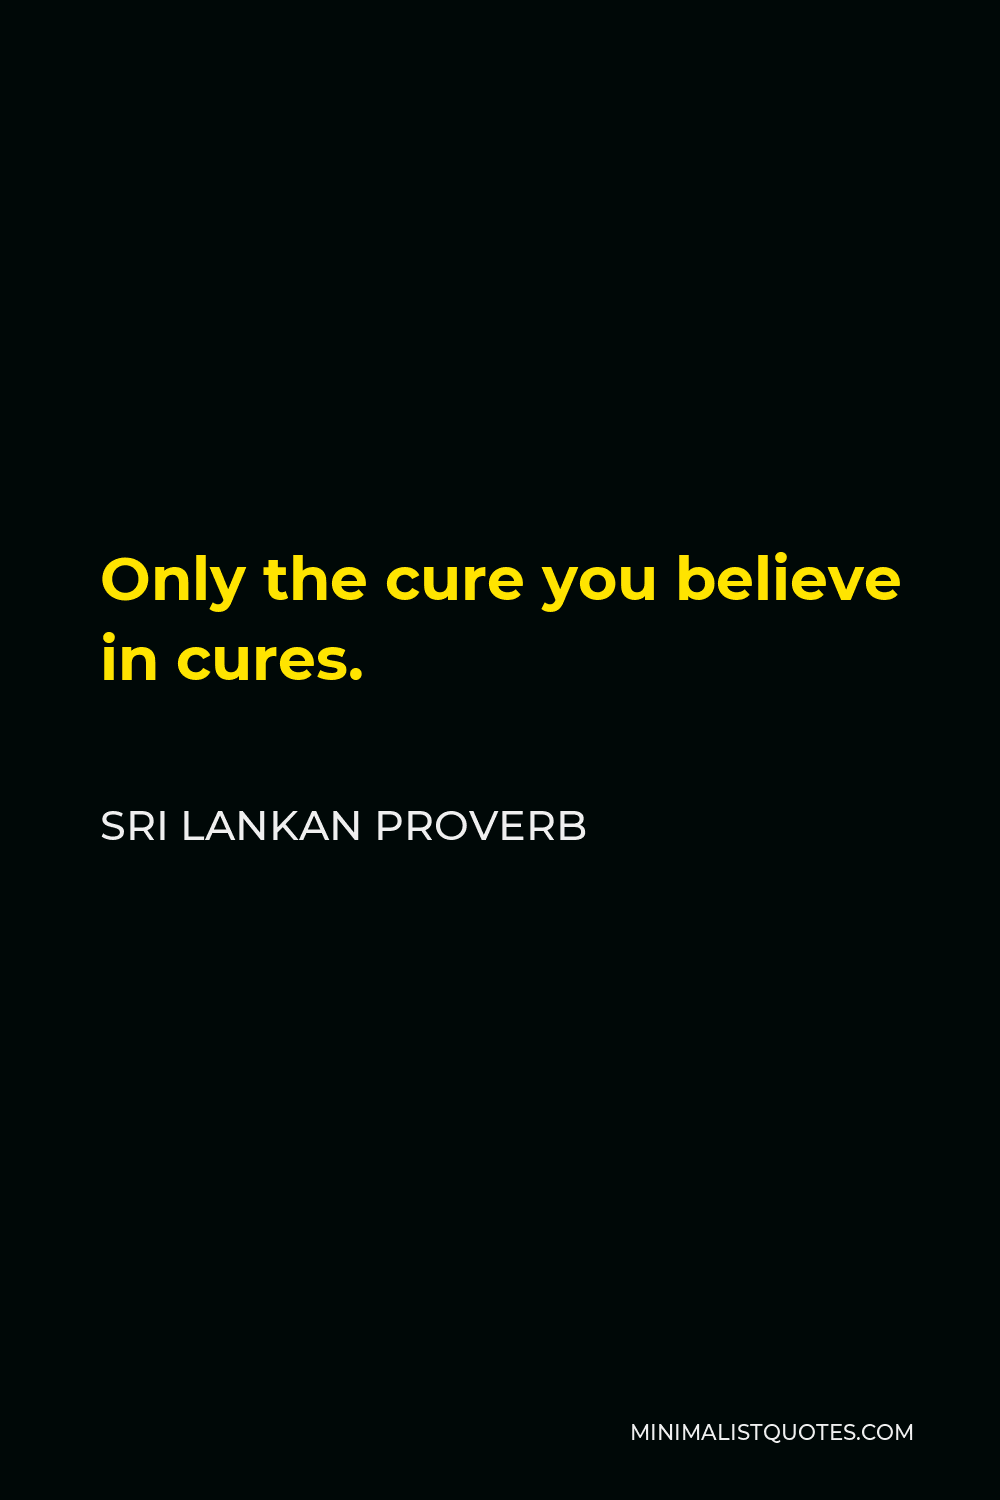 Sri Lankan Proverb Quote - Only the cure you believe in cures.